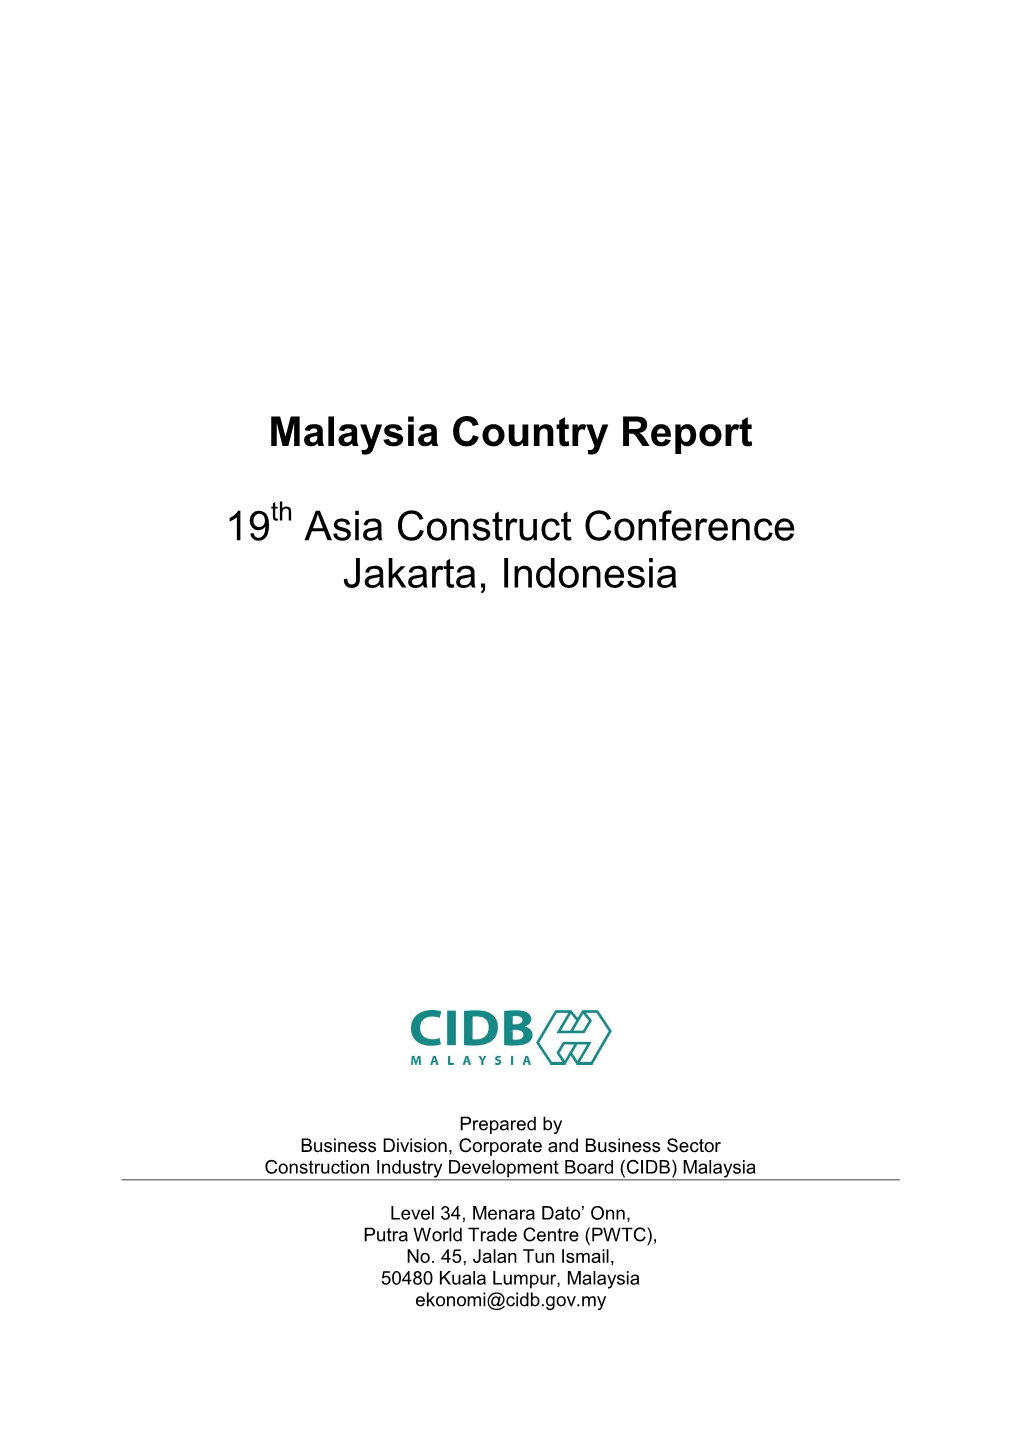 Malaysia Country Report 19 Asia Construct Conference Jakarta